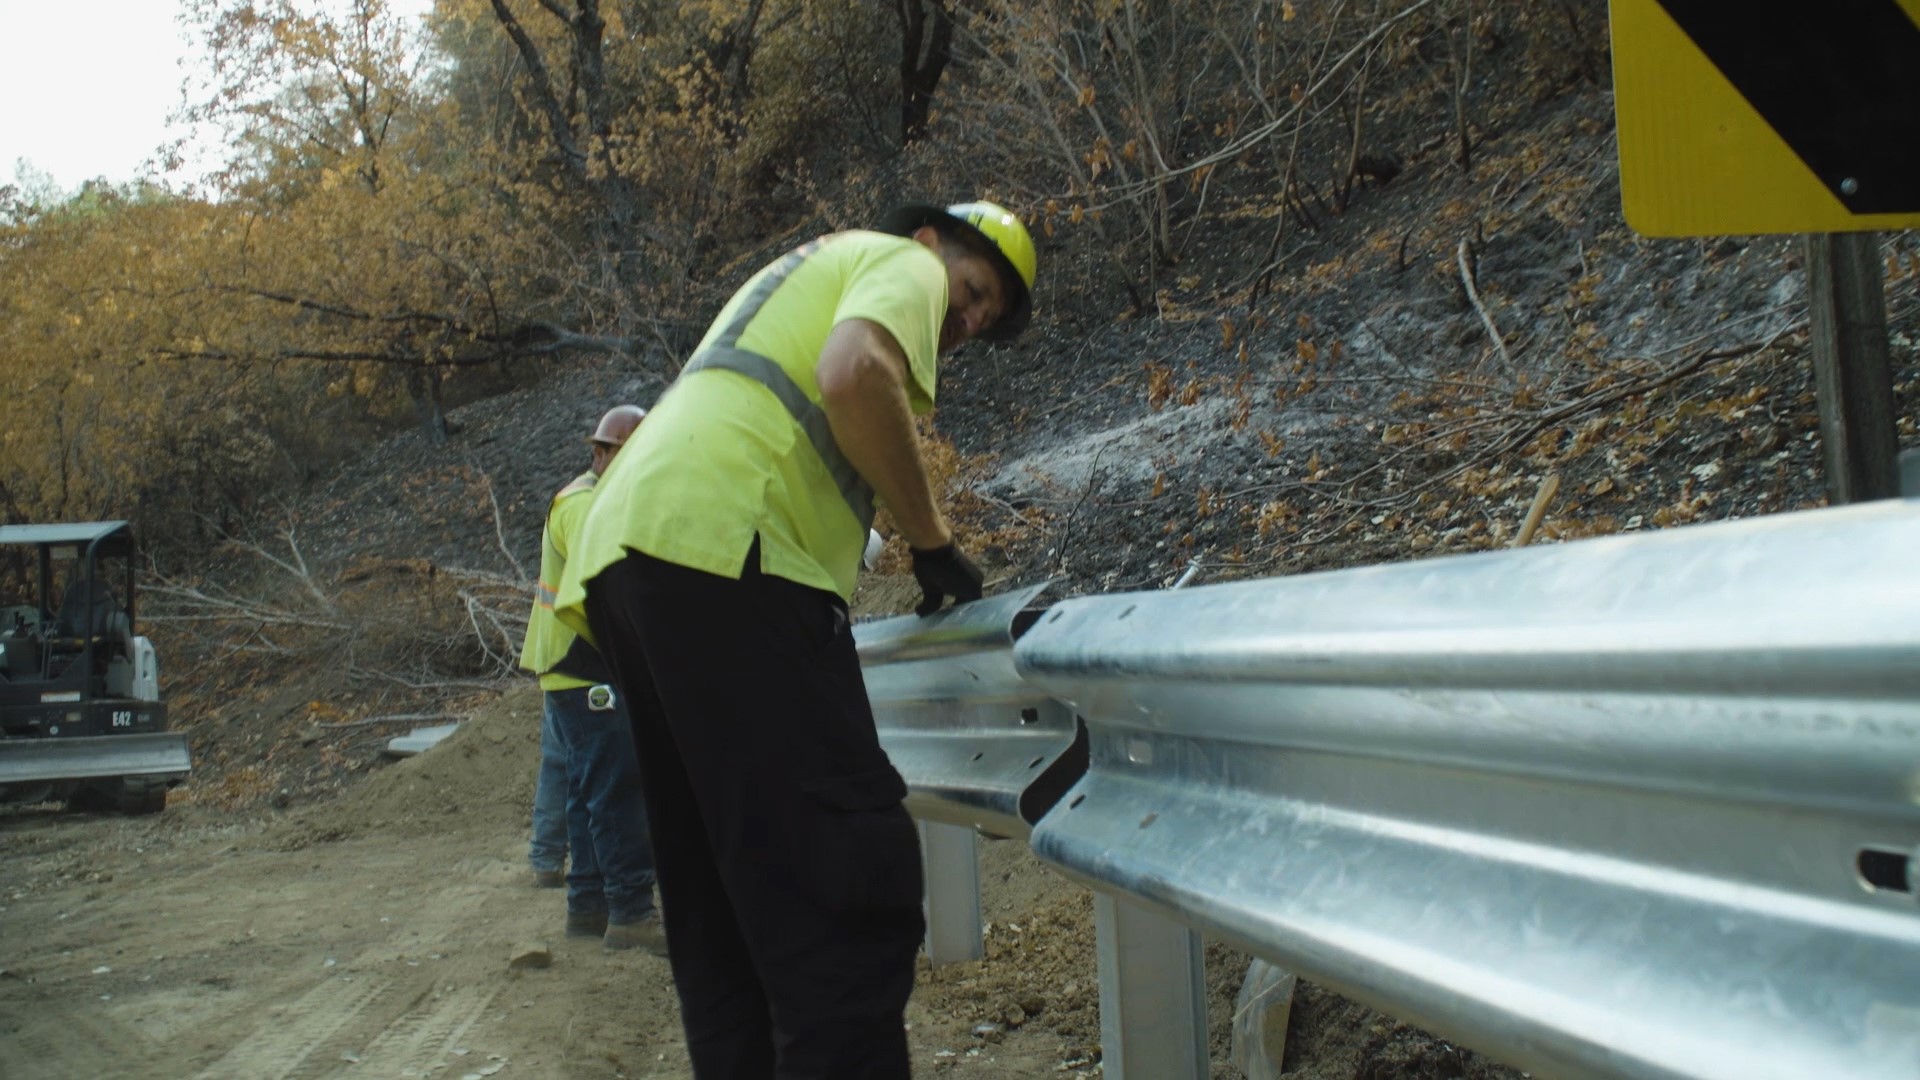 After seeing all the positive social media comments about Caltrans crews and contractors working to repair roads after wildfires, ABC10 decided to meet some of them.